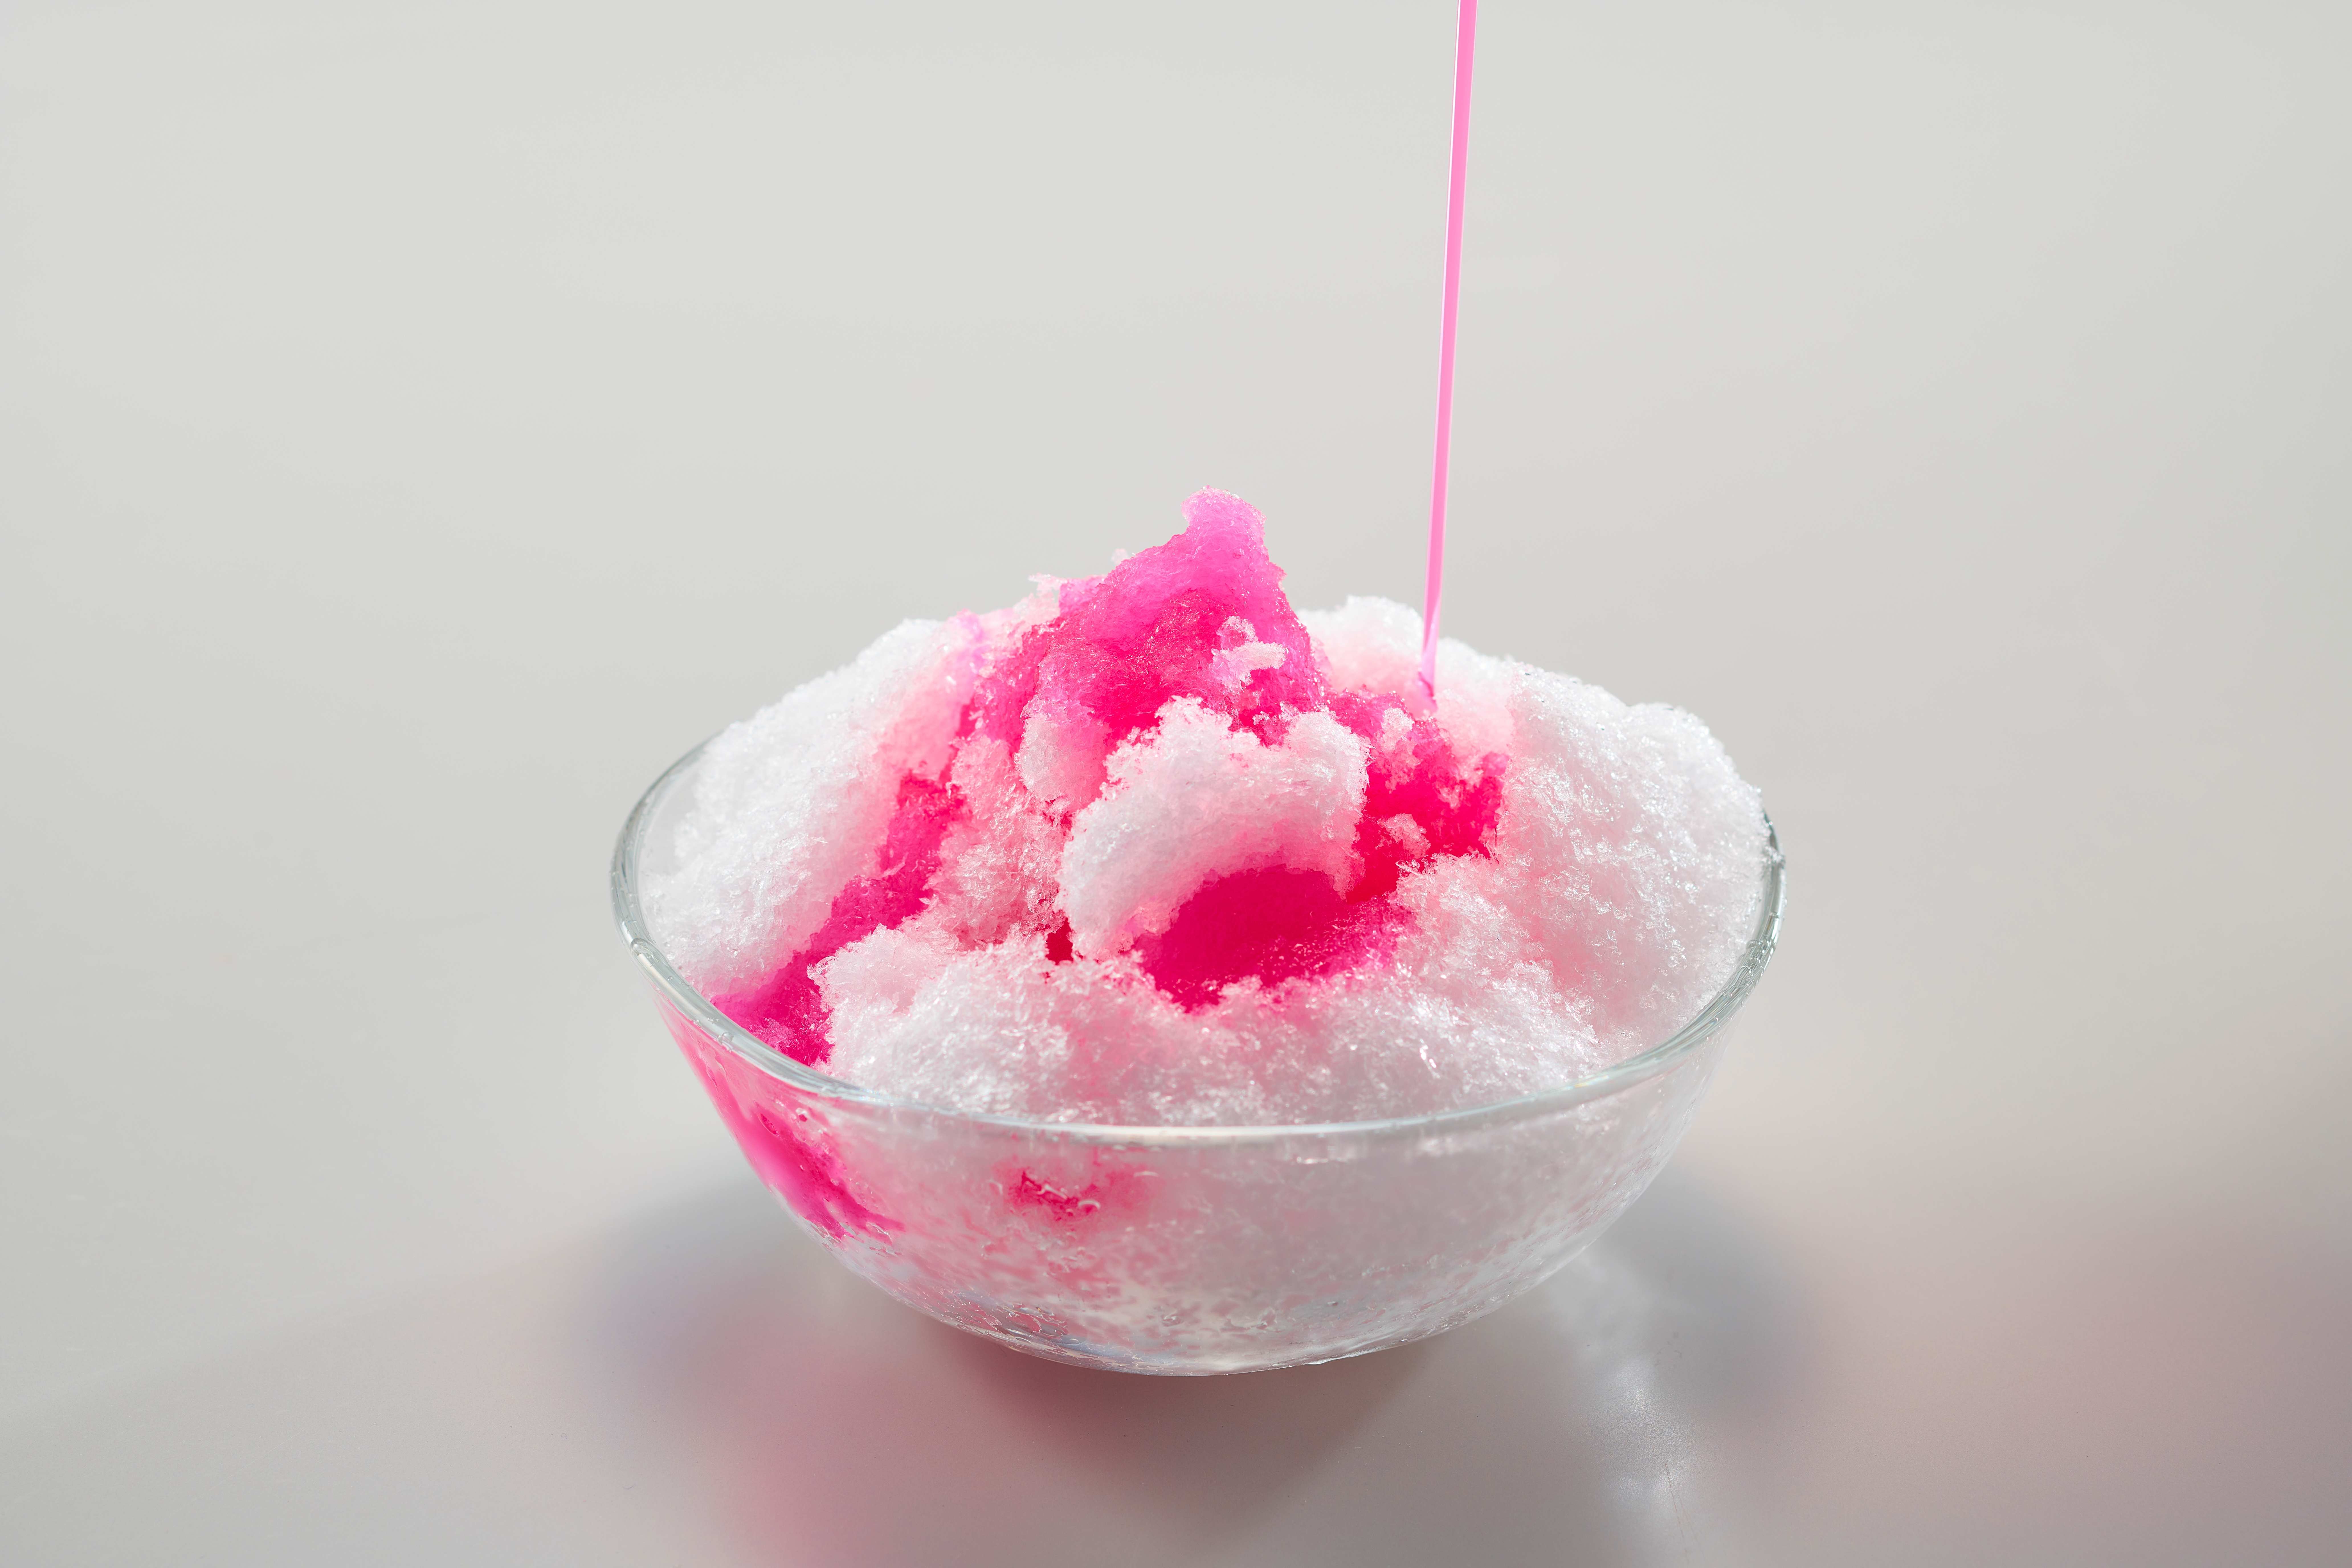 Snow cones are a refreshing summer treat to enjoy with friends.